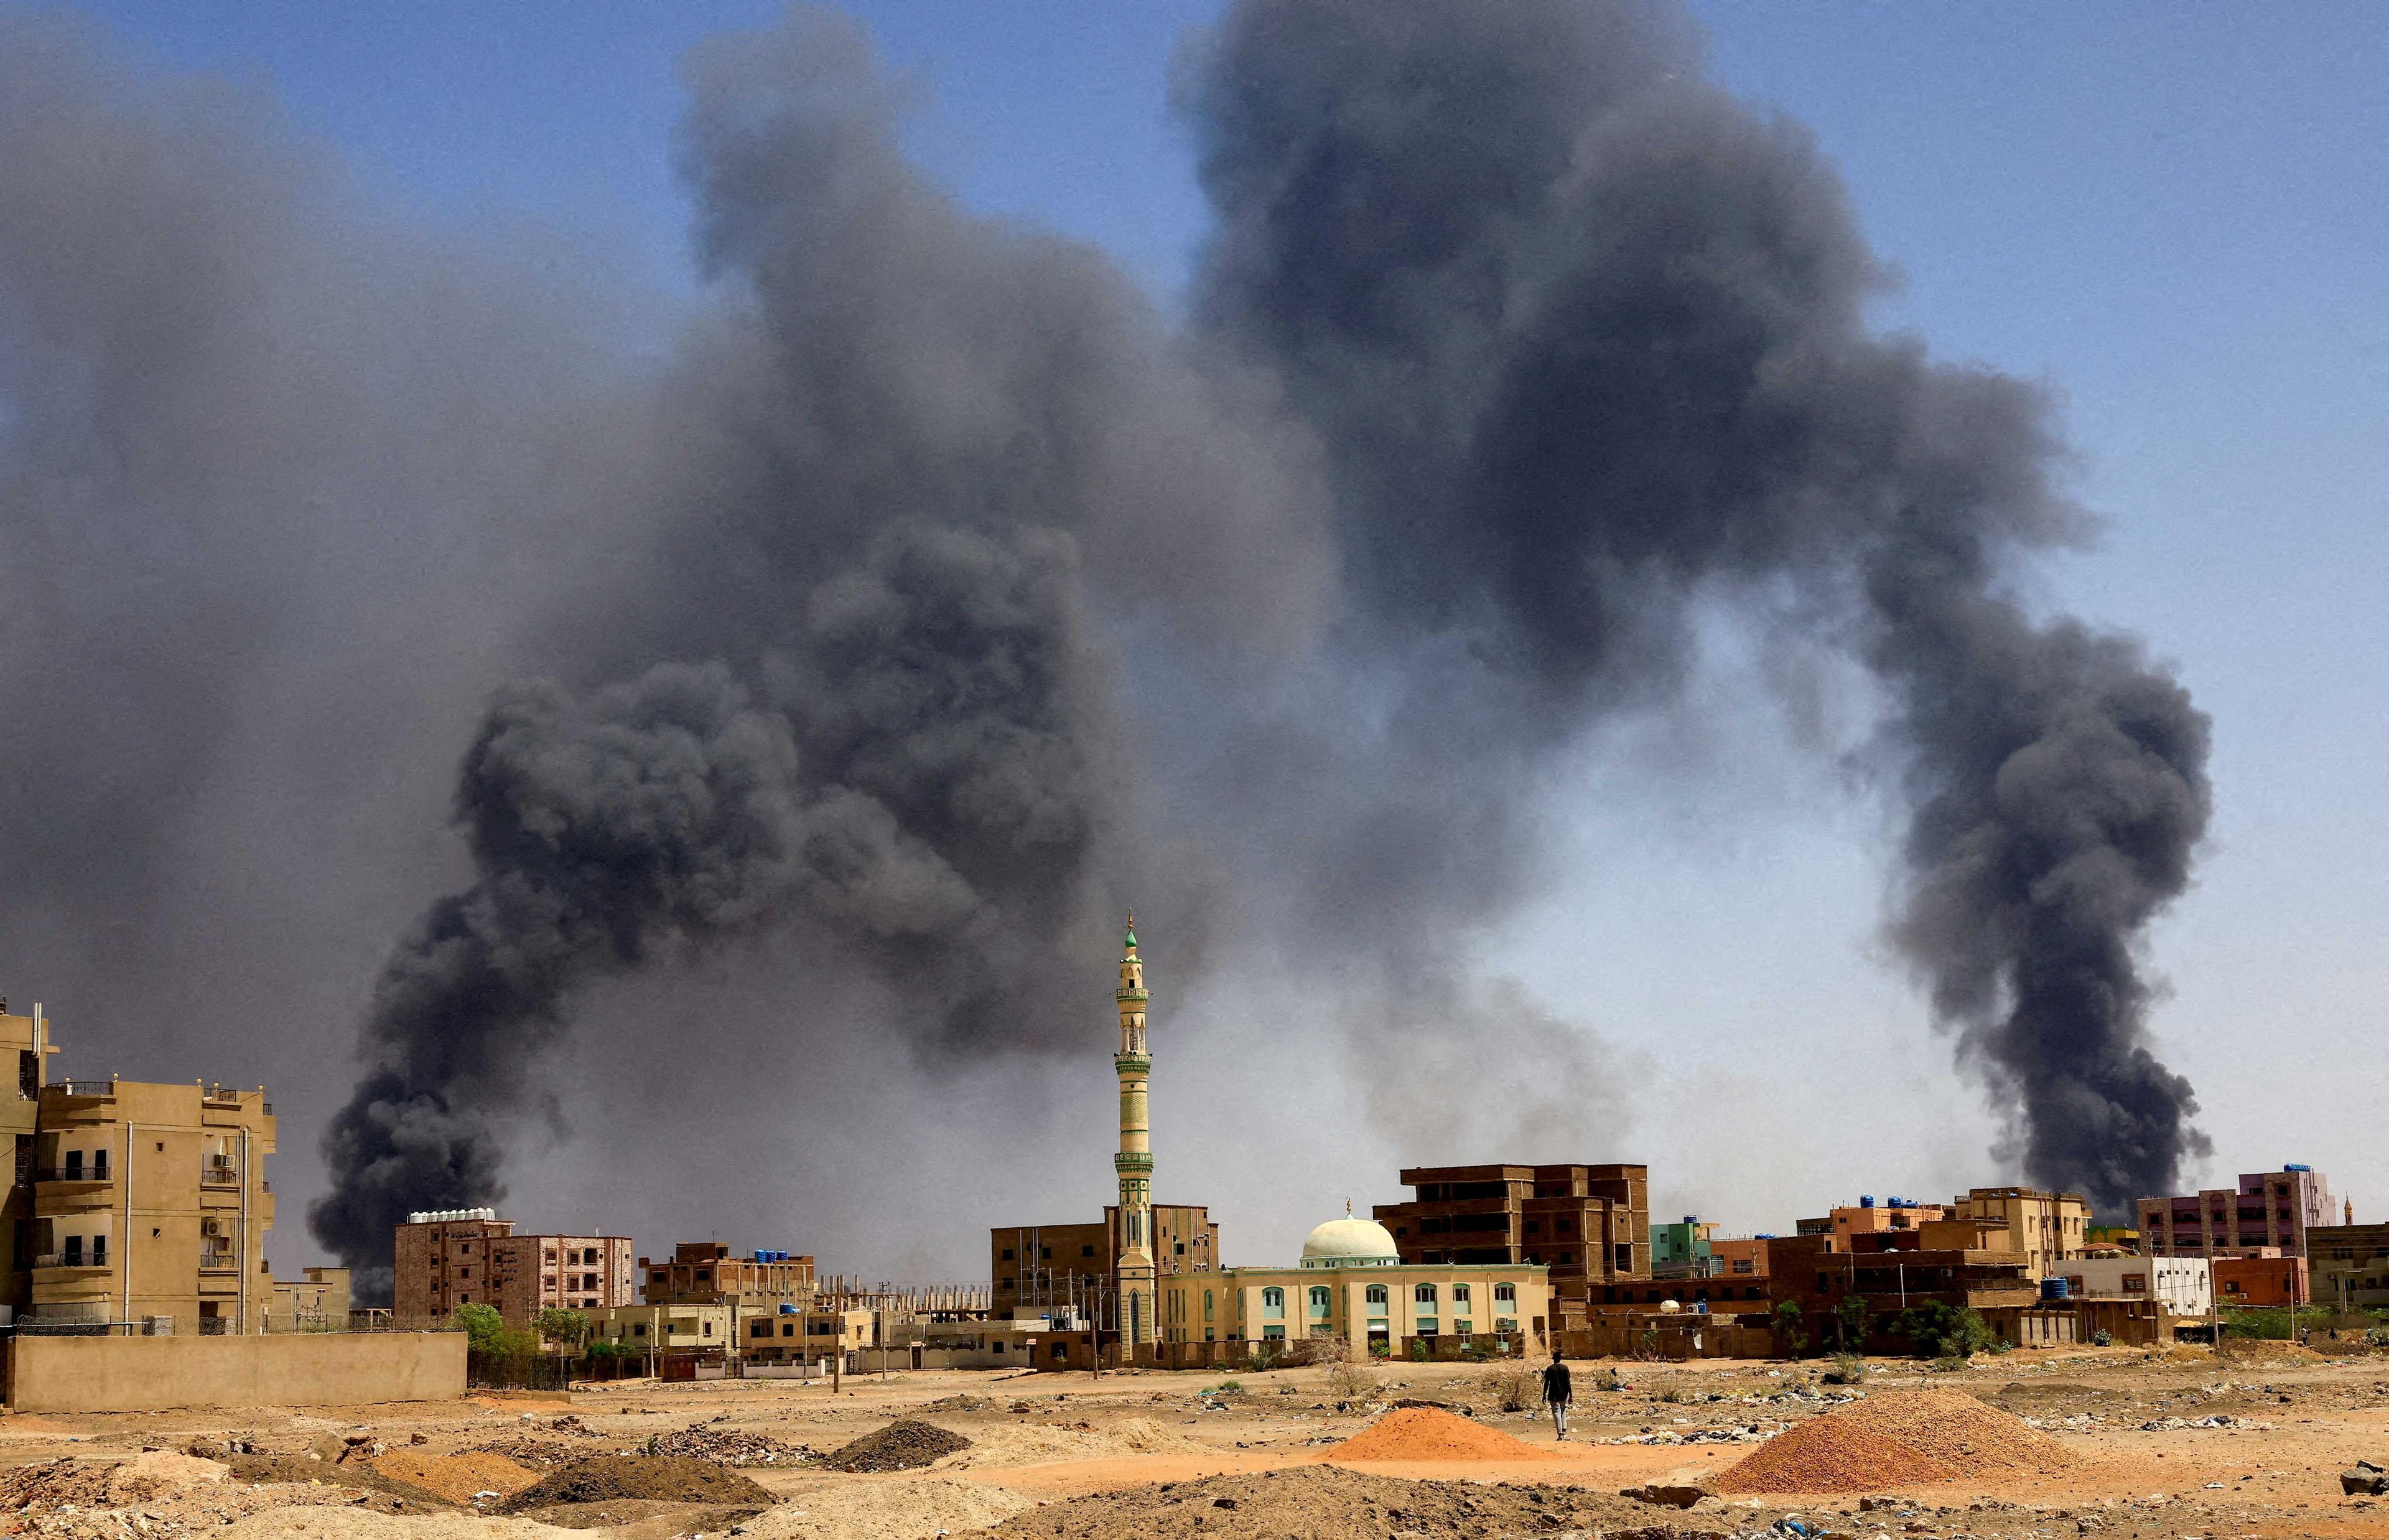 A man walks while smoke rises above buildings after aerial bombardment, during clashes between the paramilitary Rapid Support Forces and the army in Khartoum North, Sudan, May 1. Photo: Reuters